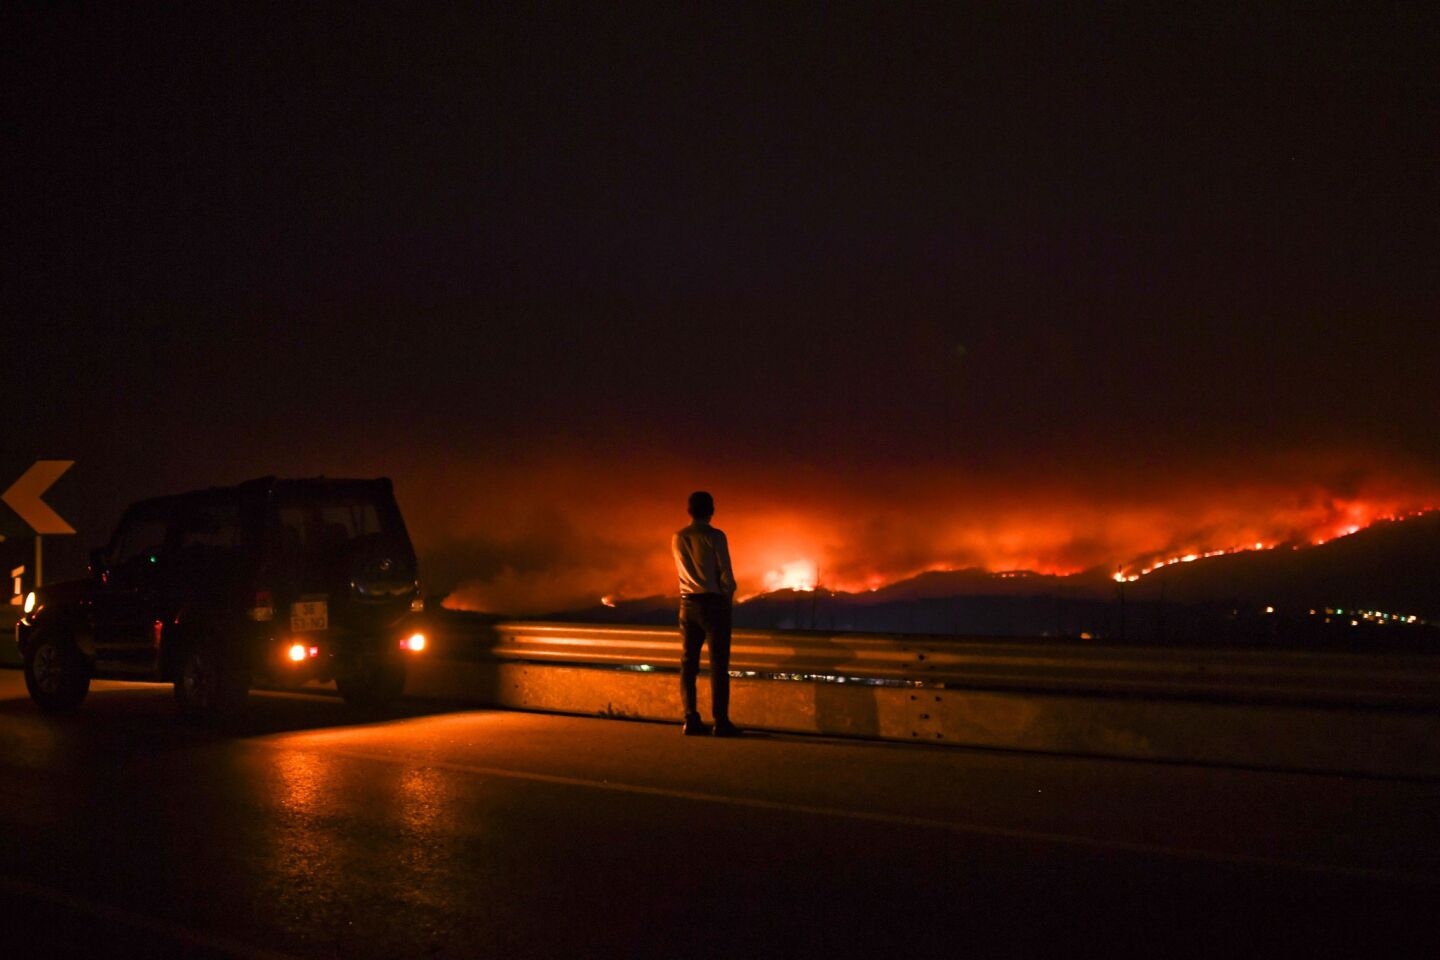 A man watches a wildfire Sunday at Anciao, Leiria, in central Portugal.